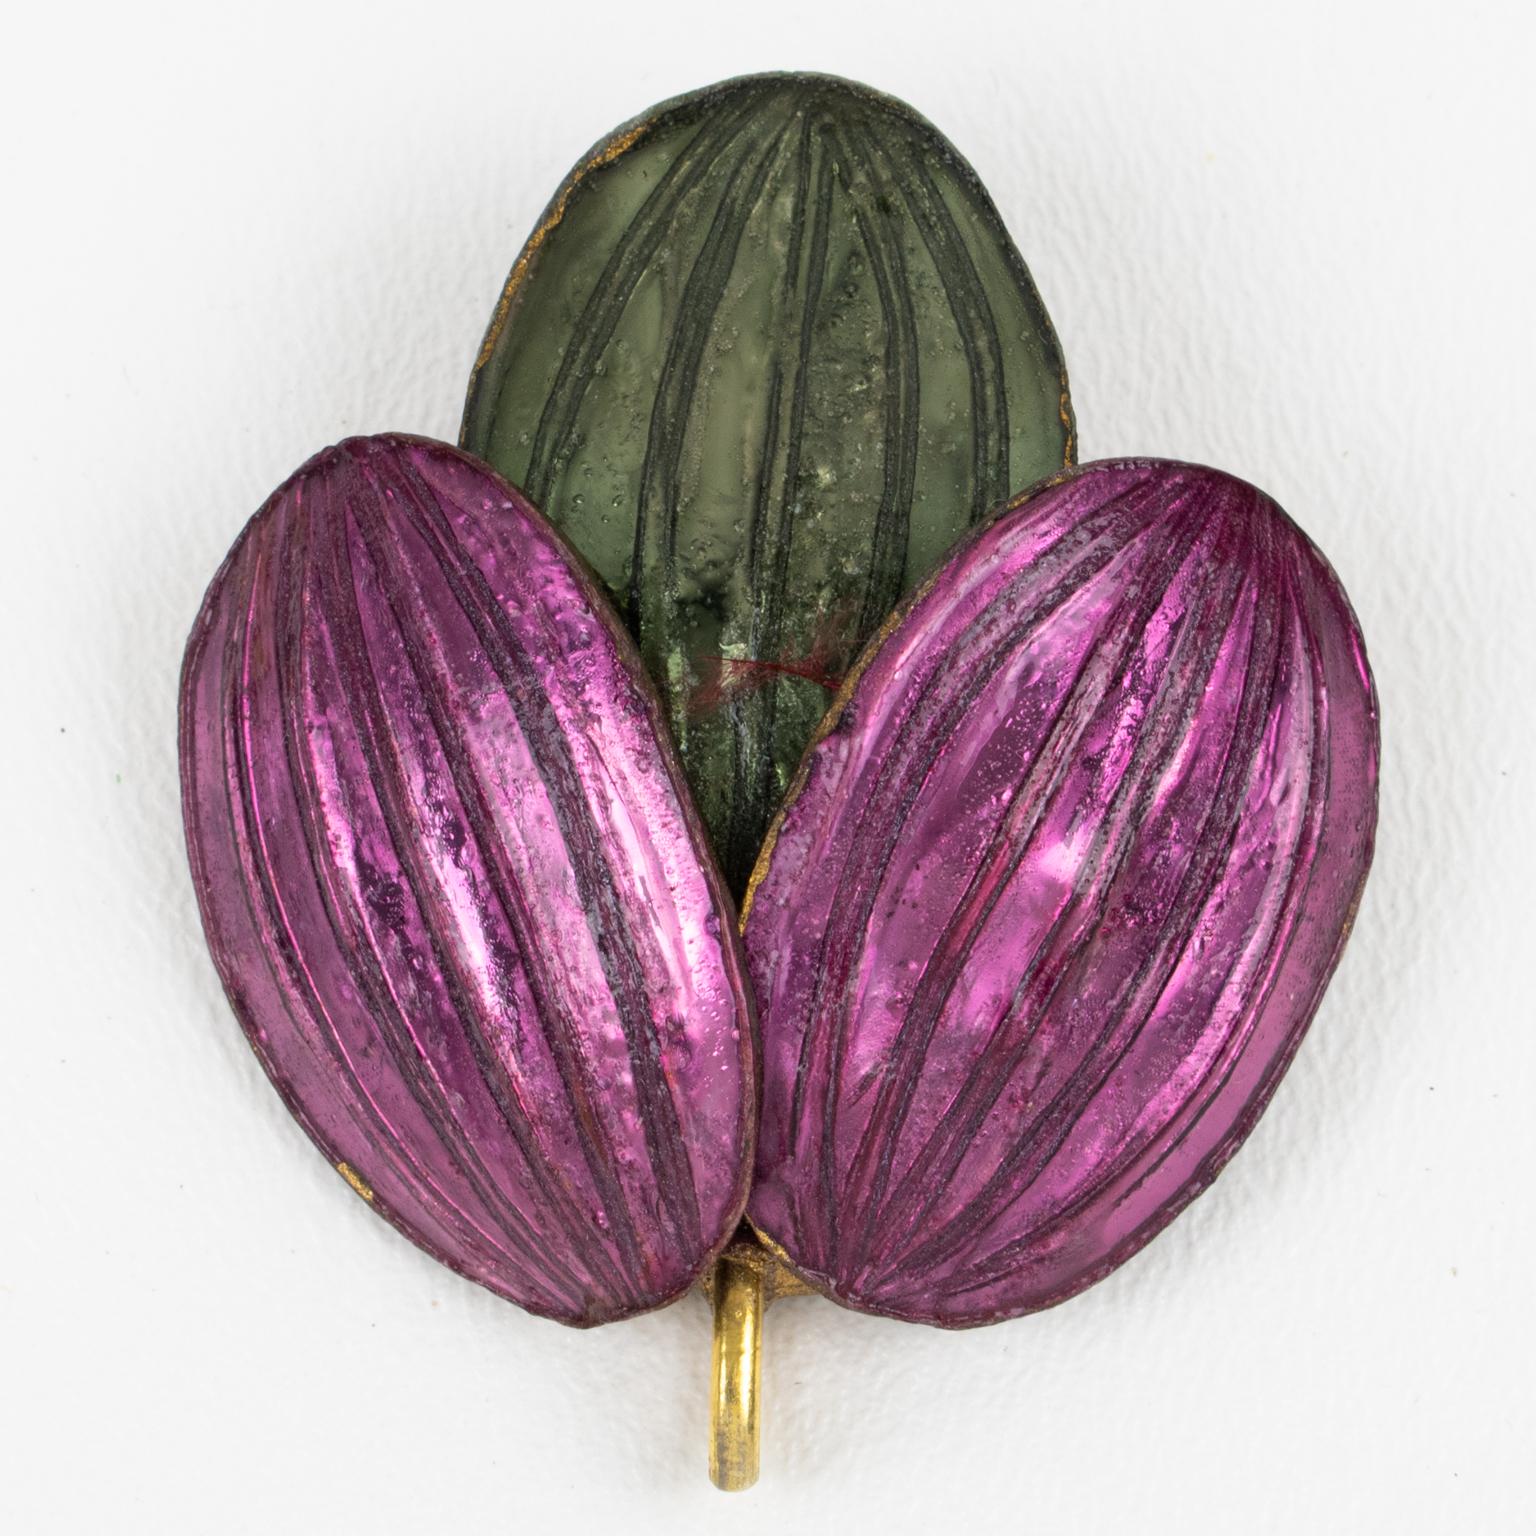 Lovely Monique Vedie Talosel or resin pin brooch. Featuring a stylized dimensional flower shape in pearlized purple and green colors. Security closing clasp. The brooch can also be used as a pendant necklace, there is a brass hook on the lower side.